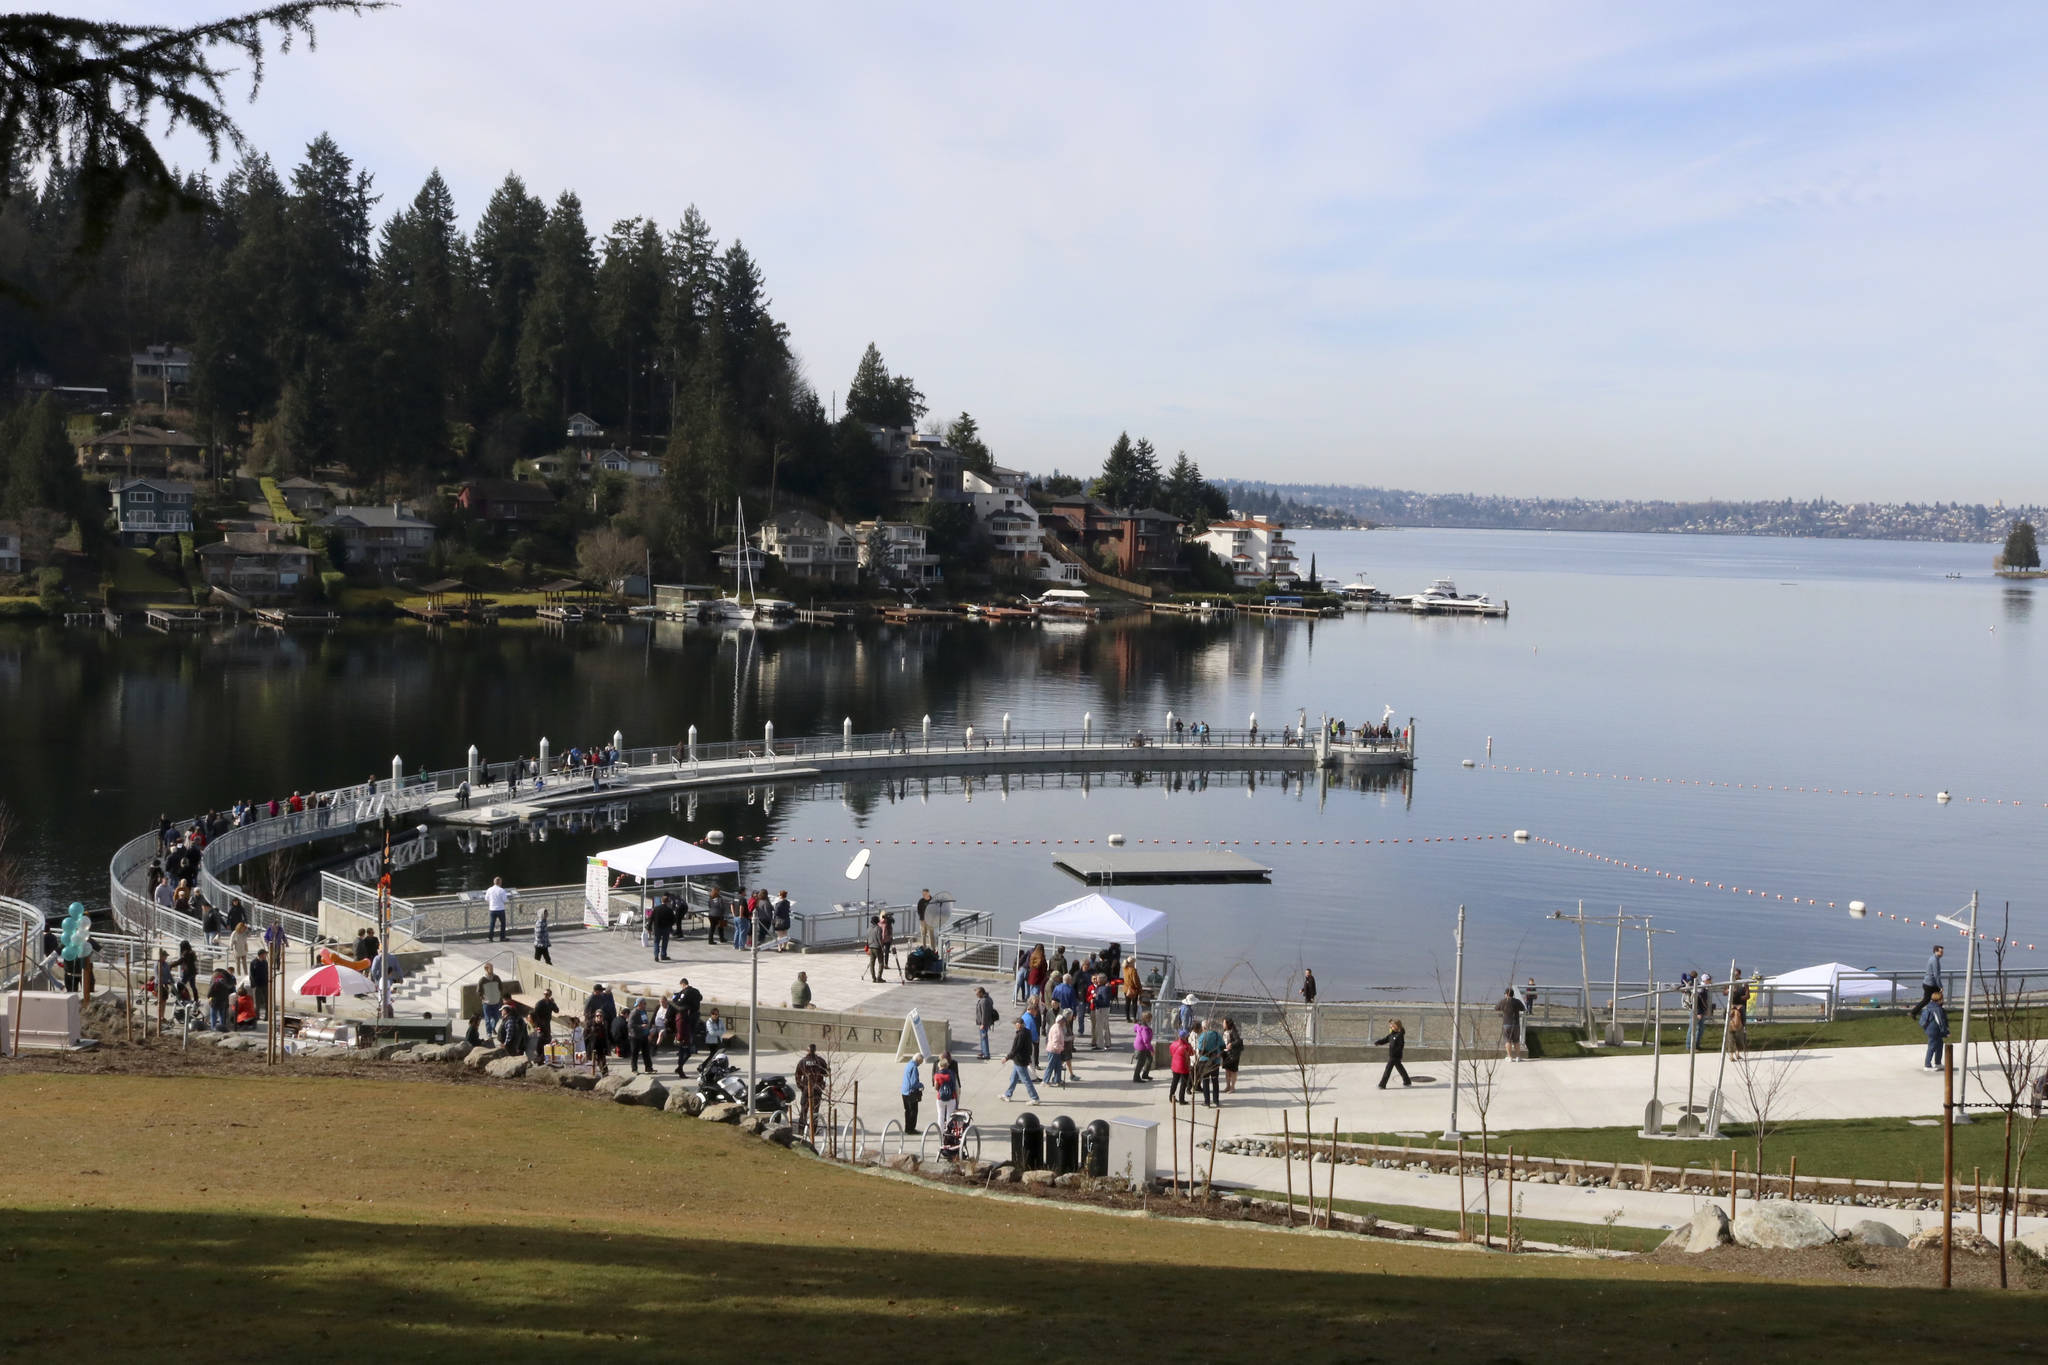 Bellevue residents explore the new pier at Meydenbauer Bay Park during the grand opening event. File photo 2019.